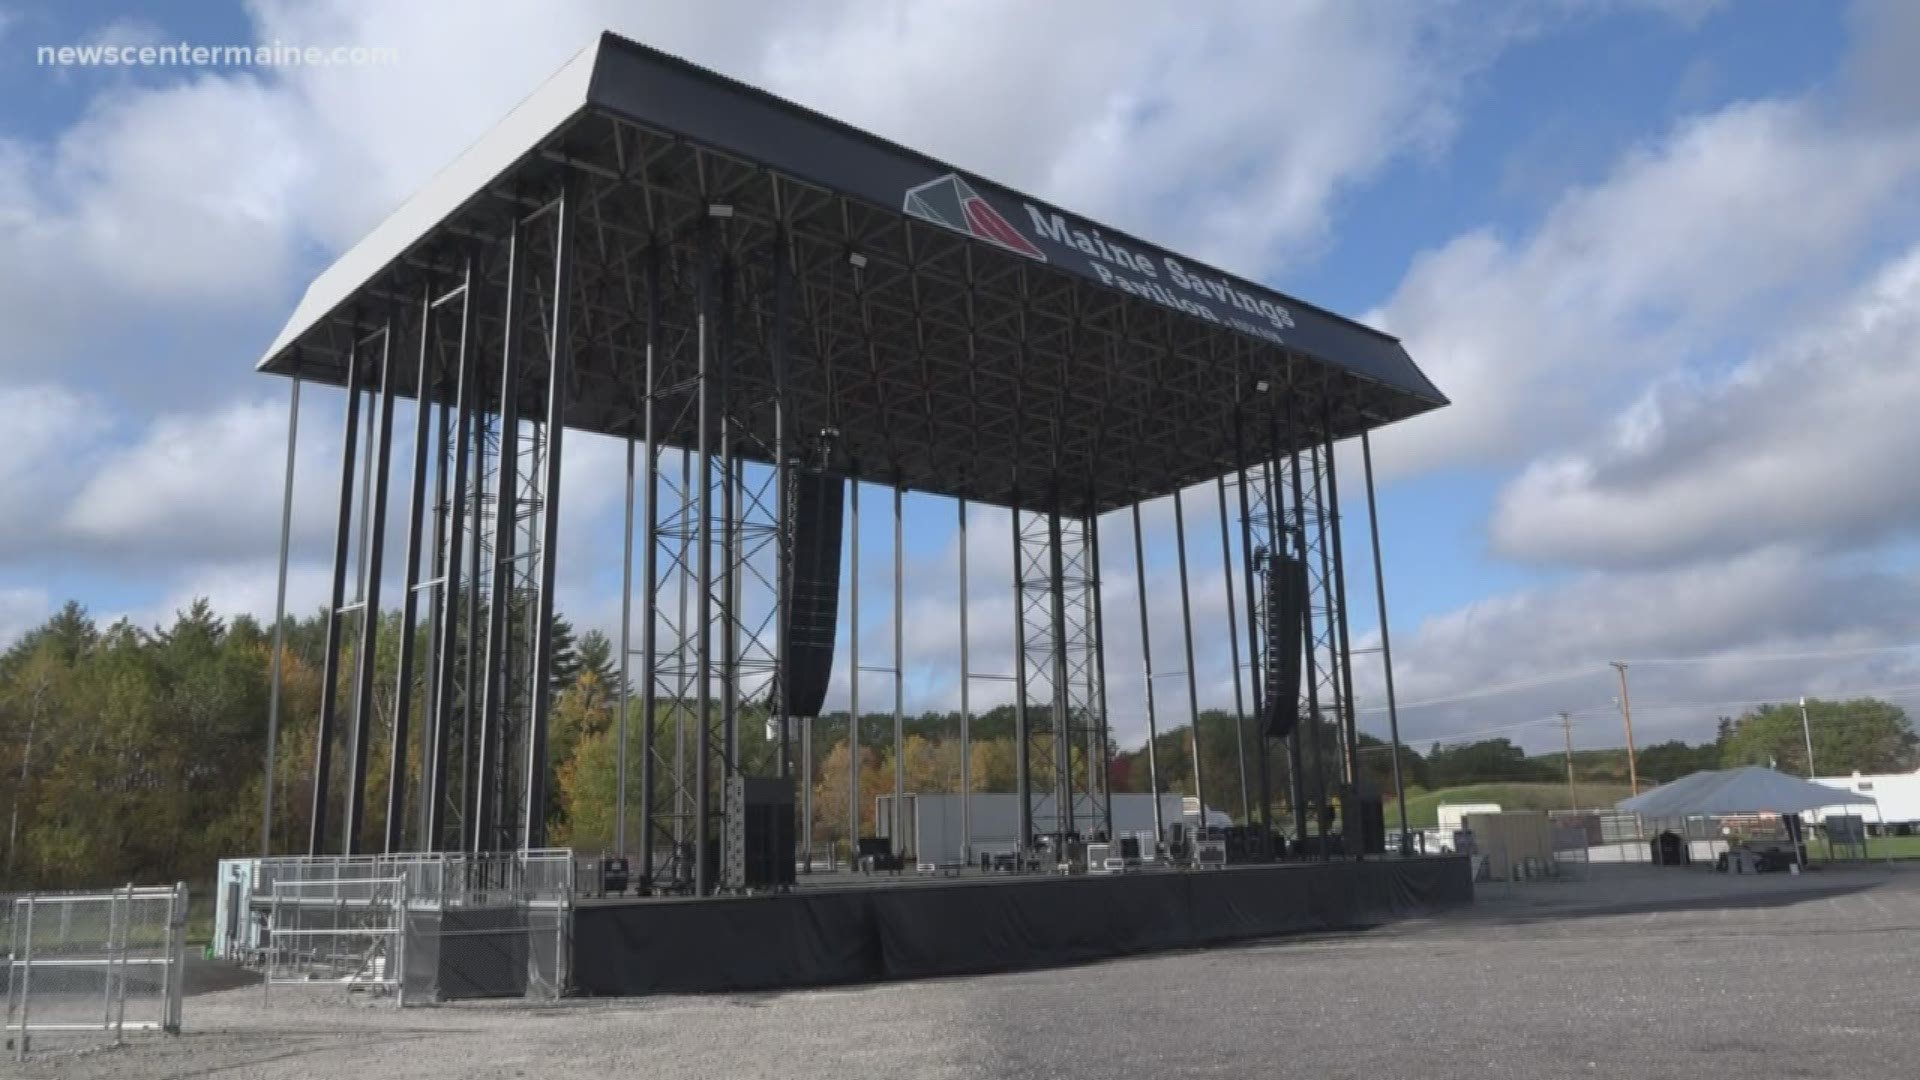 Rock Row concert venue in Maine conducting noise tests | newscentermaine.com